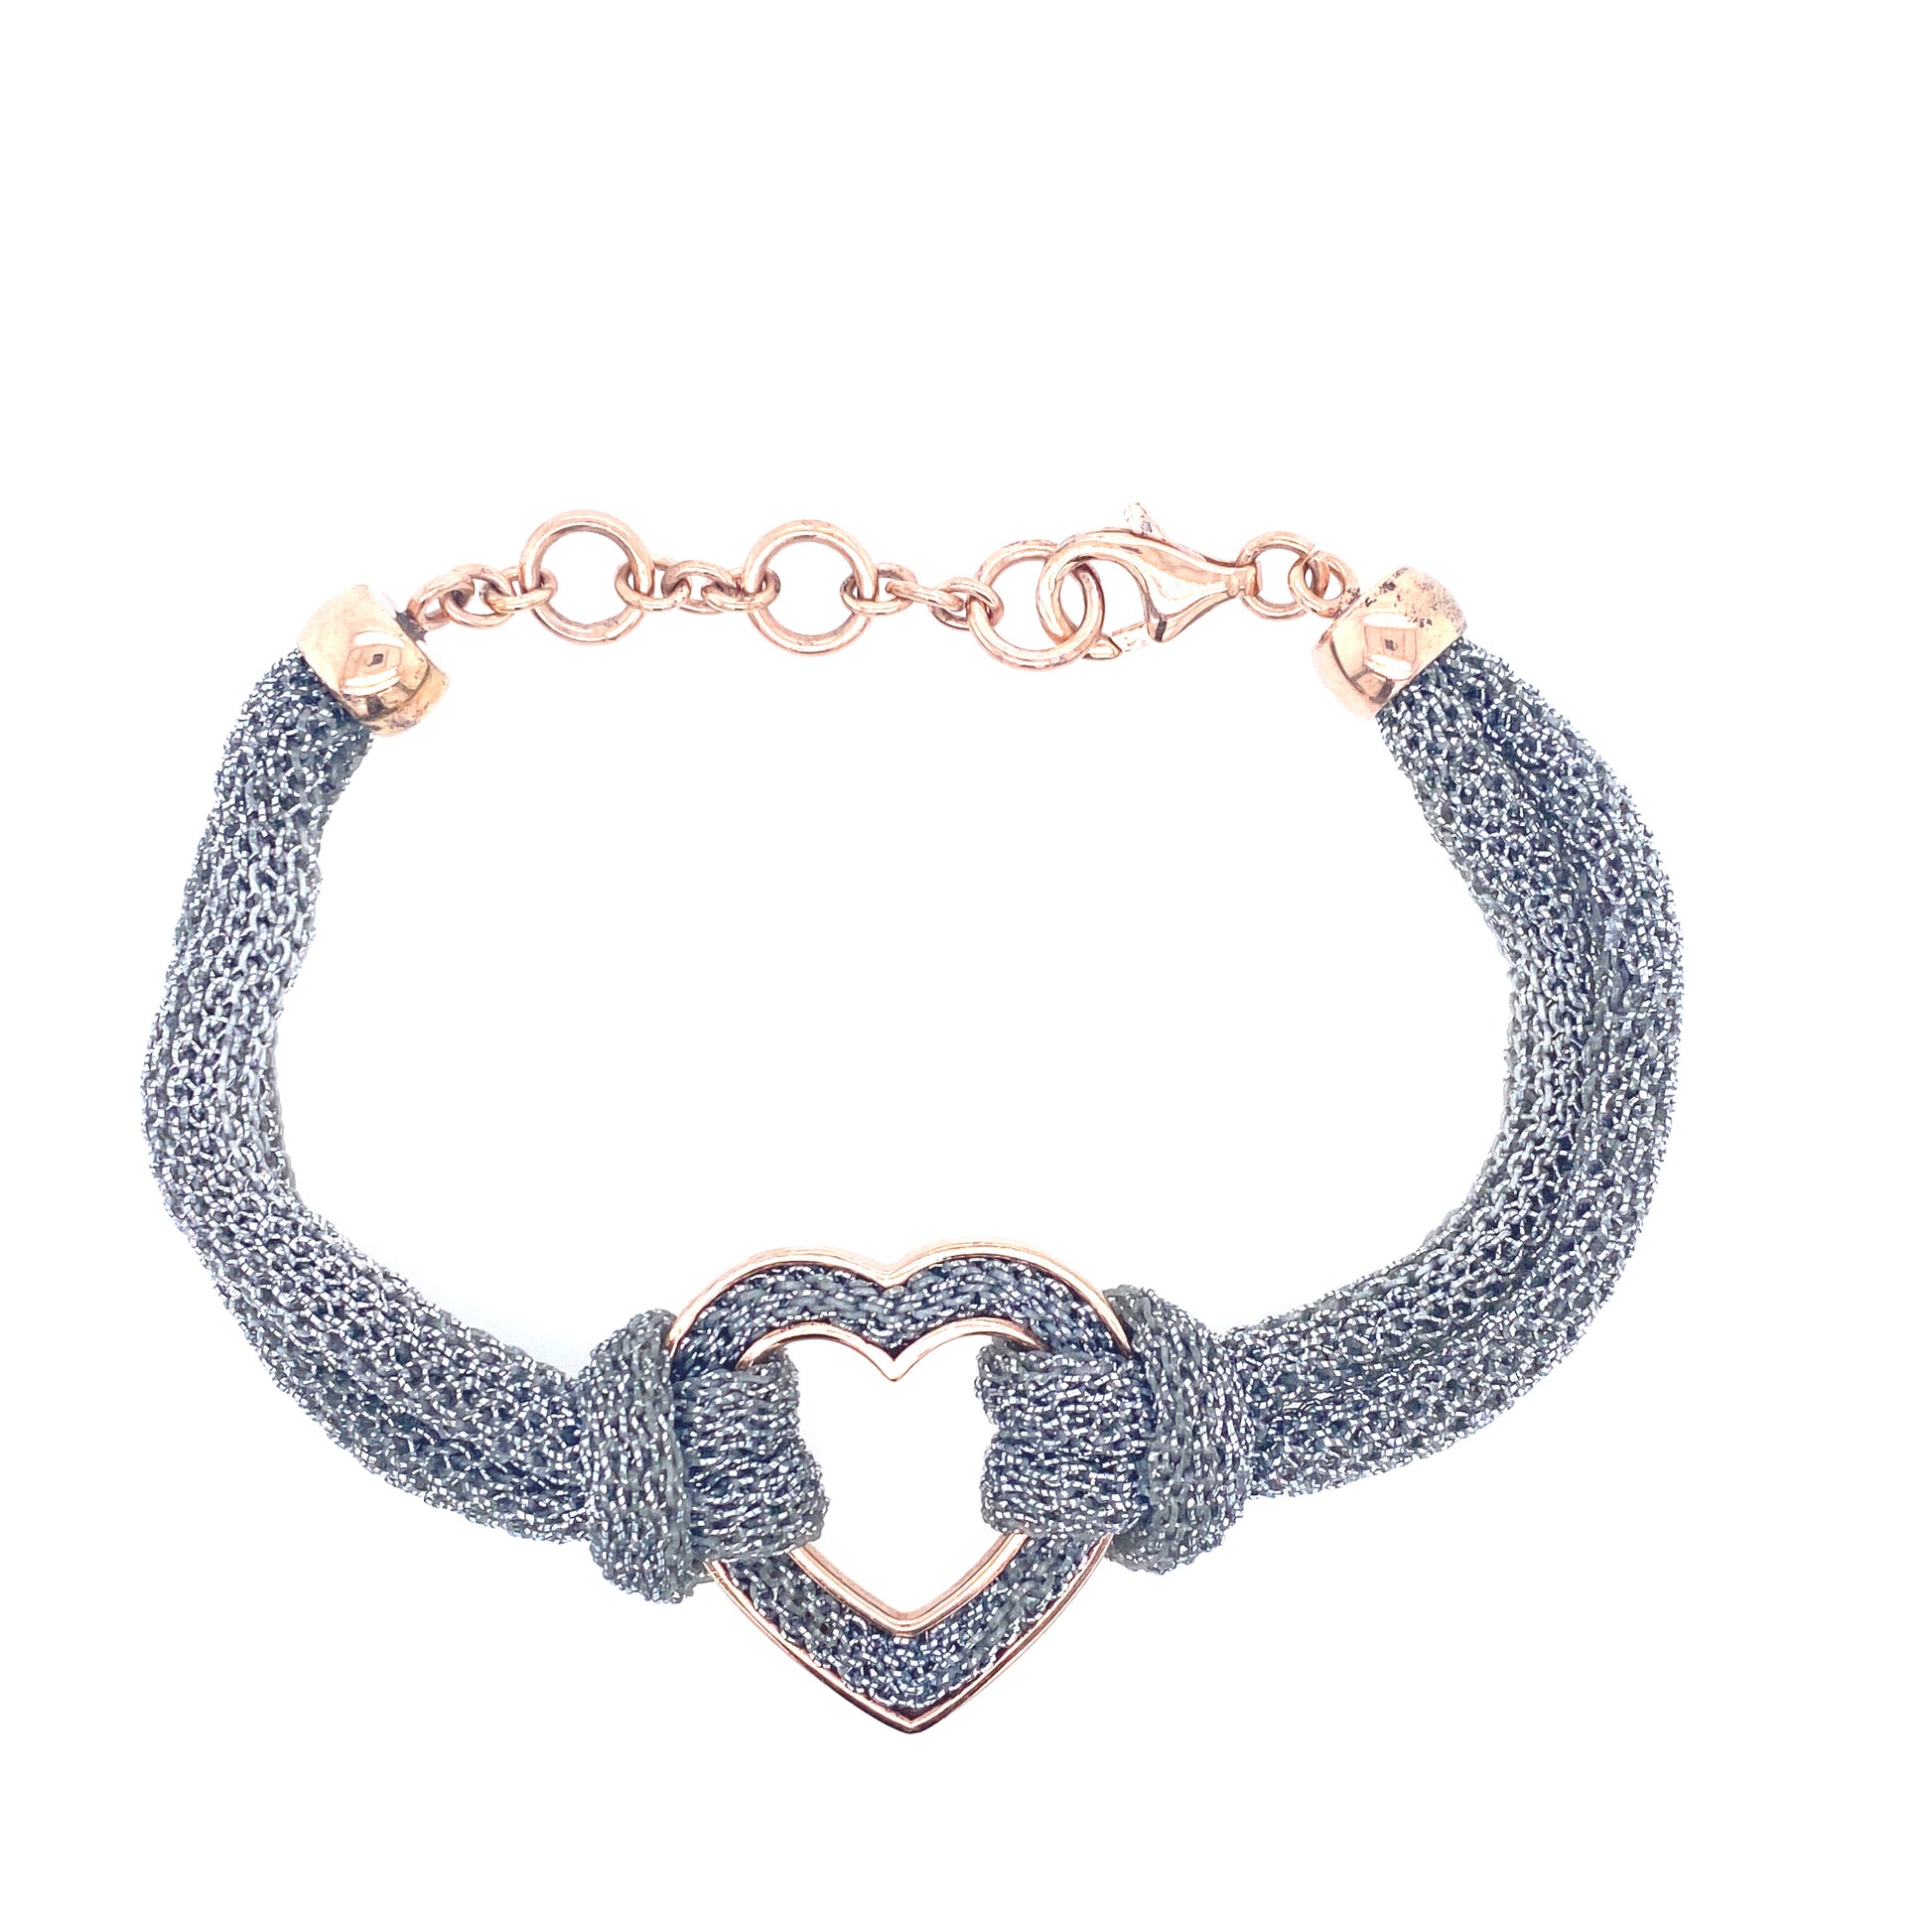 Heart Silver Mesh Bracelet with Rose Gold Details | Adami & Martucci | Luby 